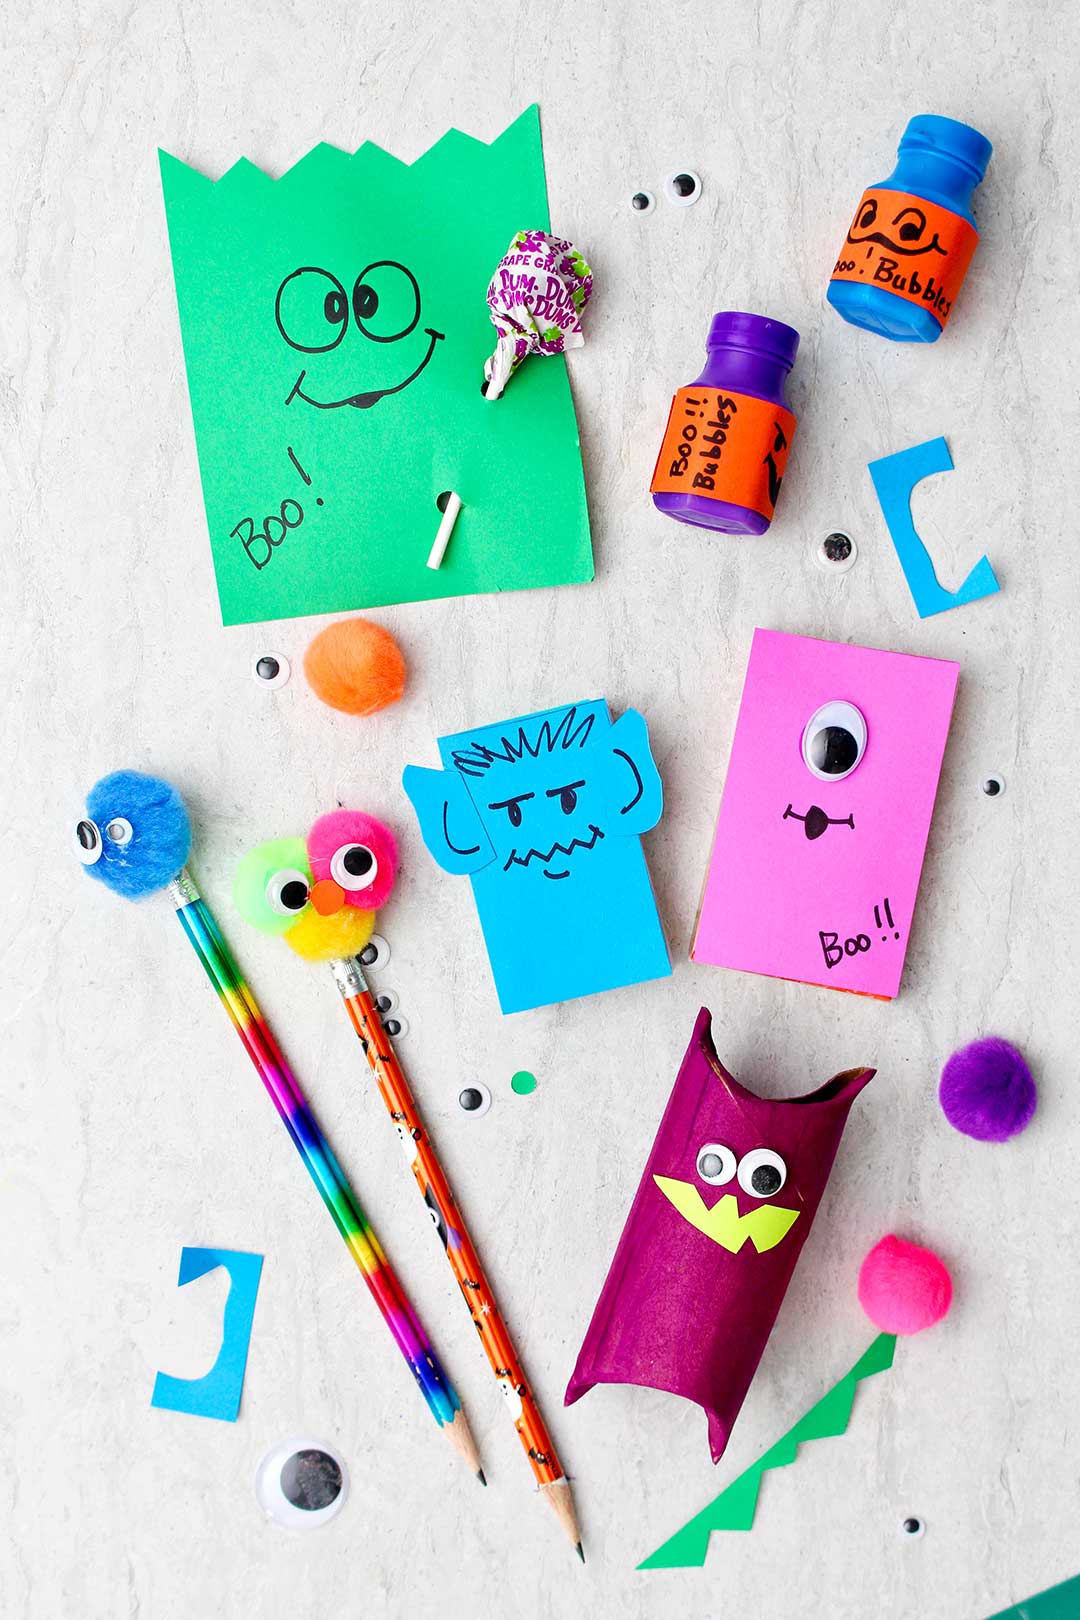 5 Fun & Easy Construction Paper Halloween Crafts - How Wee Learn